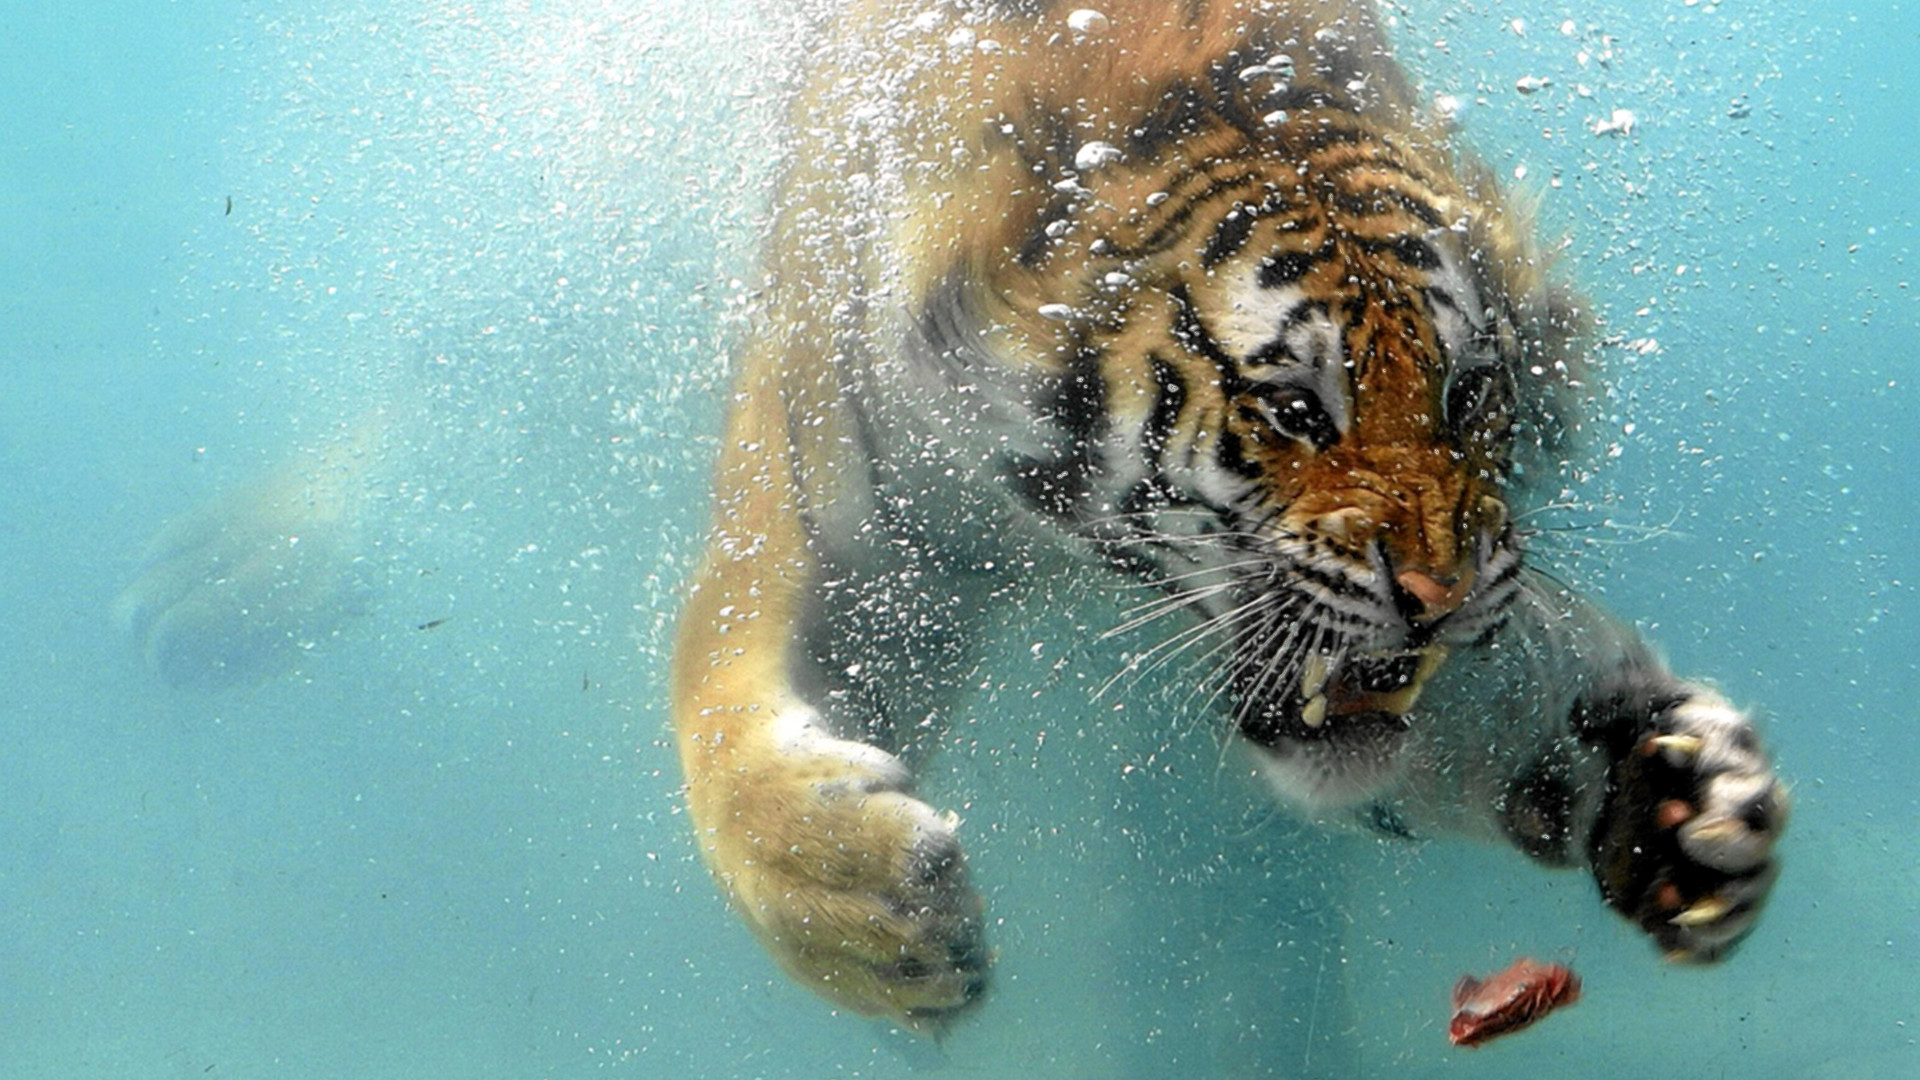 1920x1080 Swimming Tiger HD Wallpaper in Full HD from the Animals category.